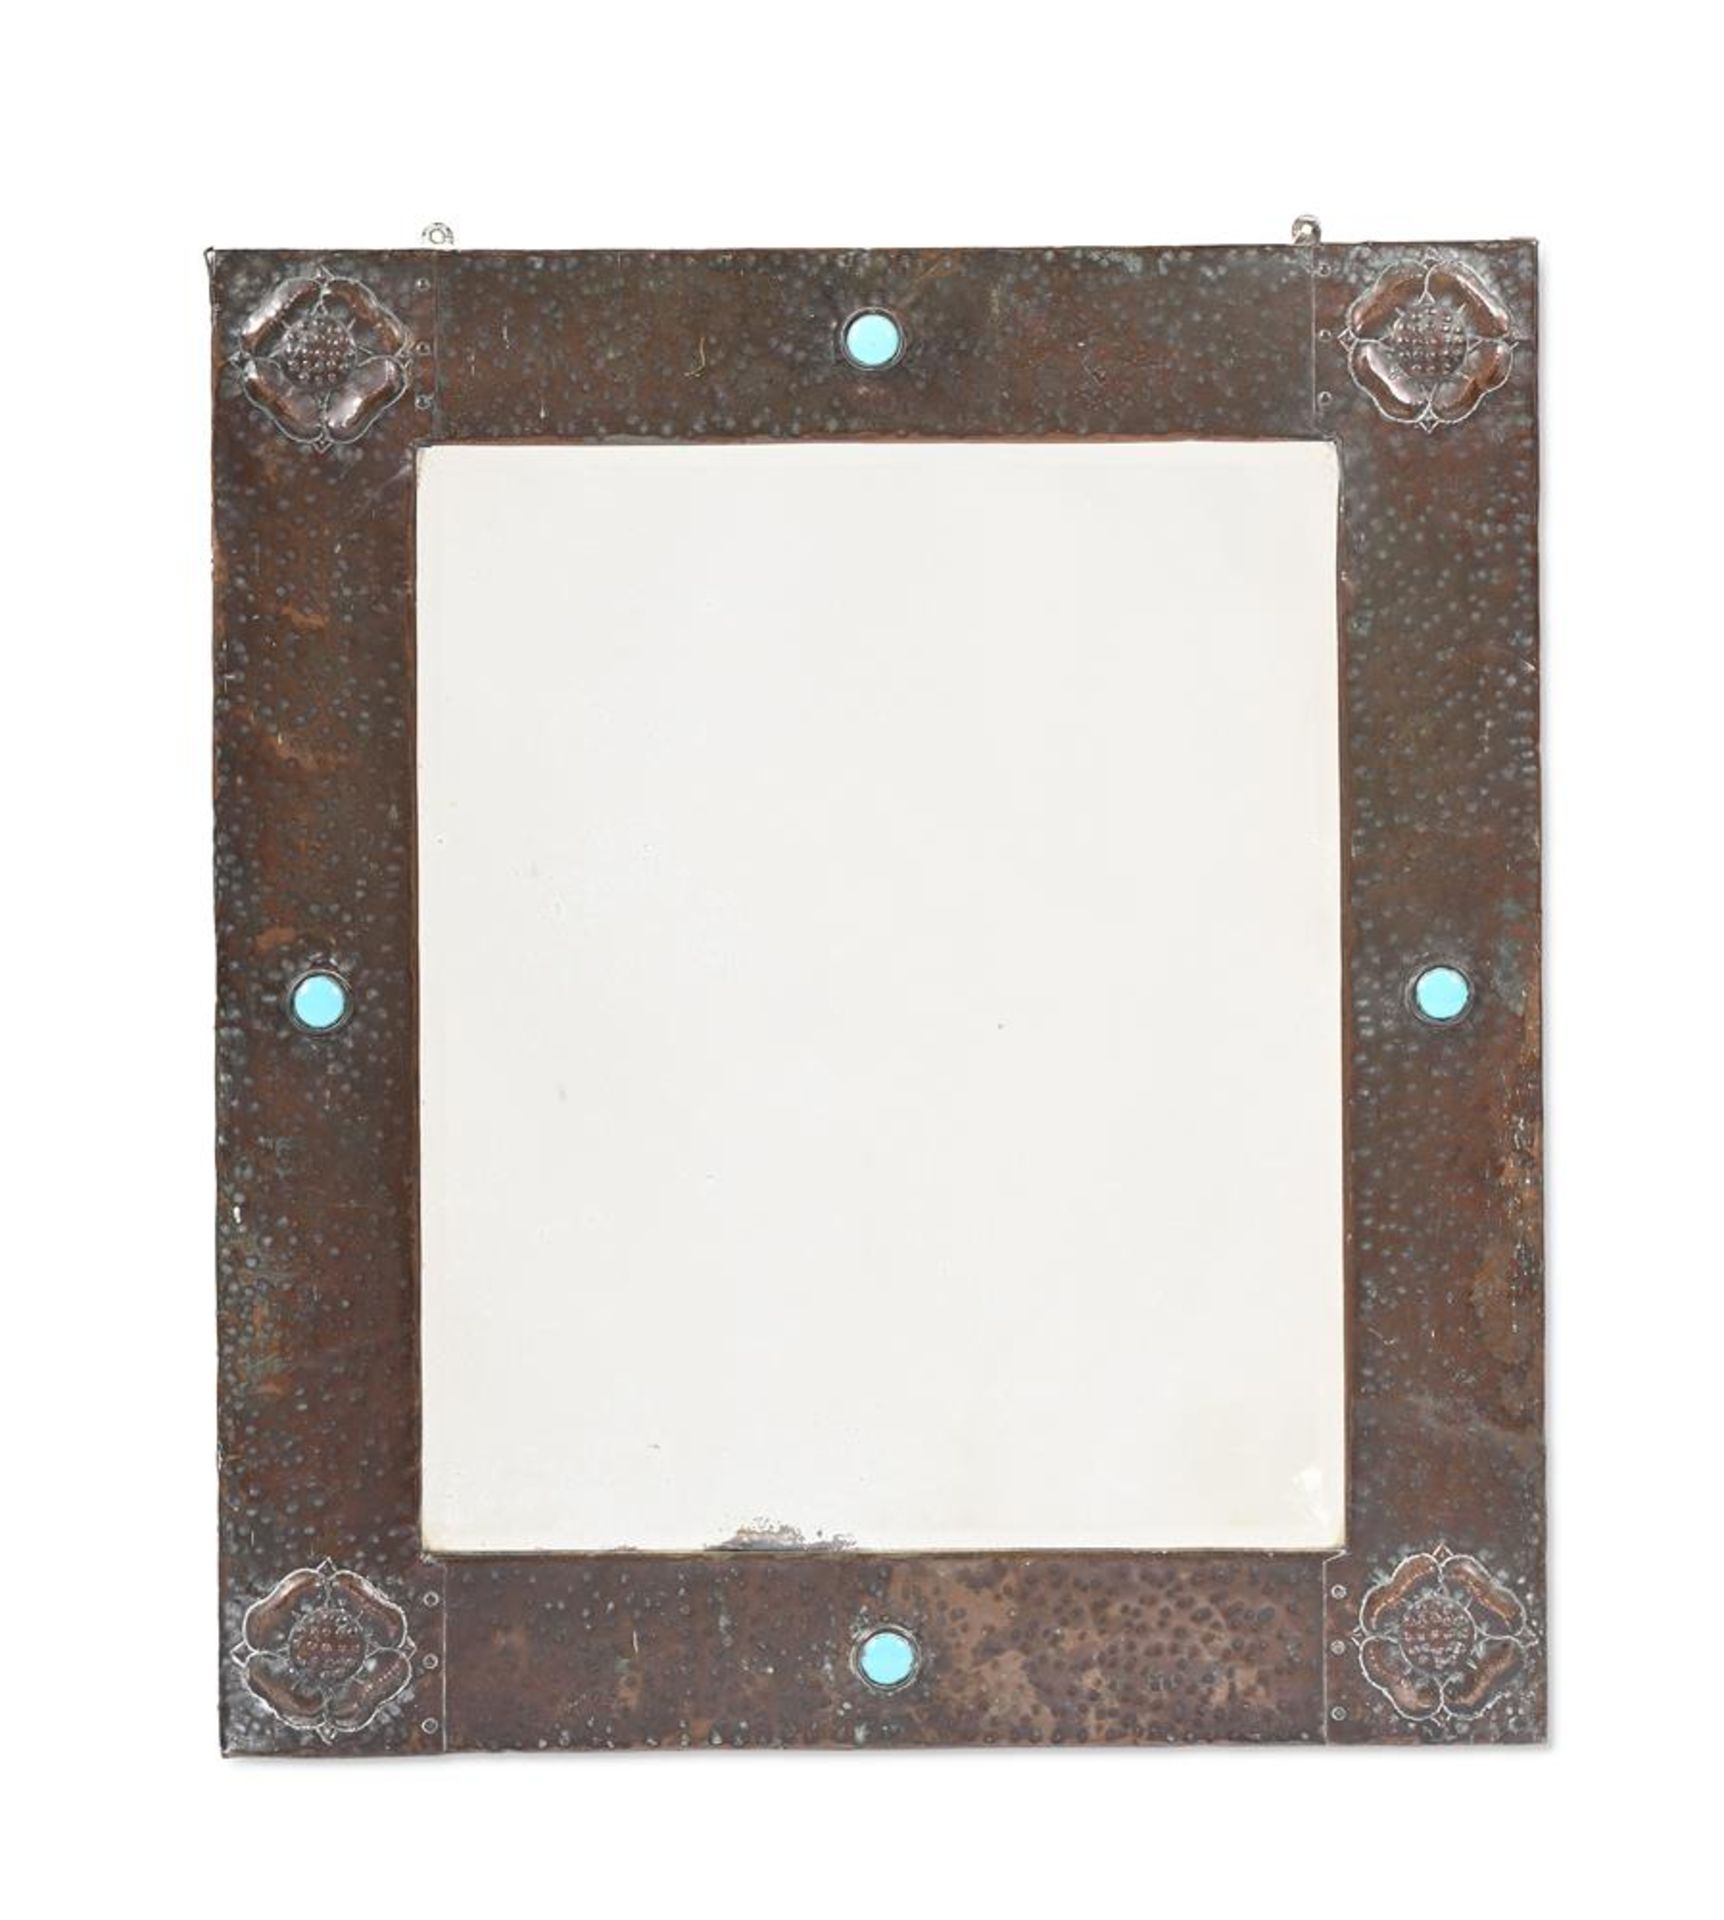 AN ARTS AND CRAFTS HAMMERED COPPER AND TURQUOISE ENAMEL WALL MIRROR, BY LIBERTY & CO